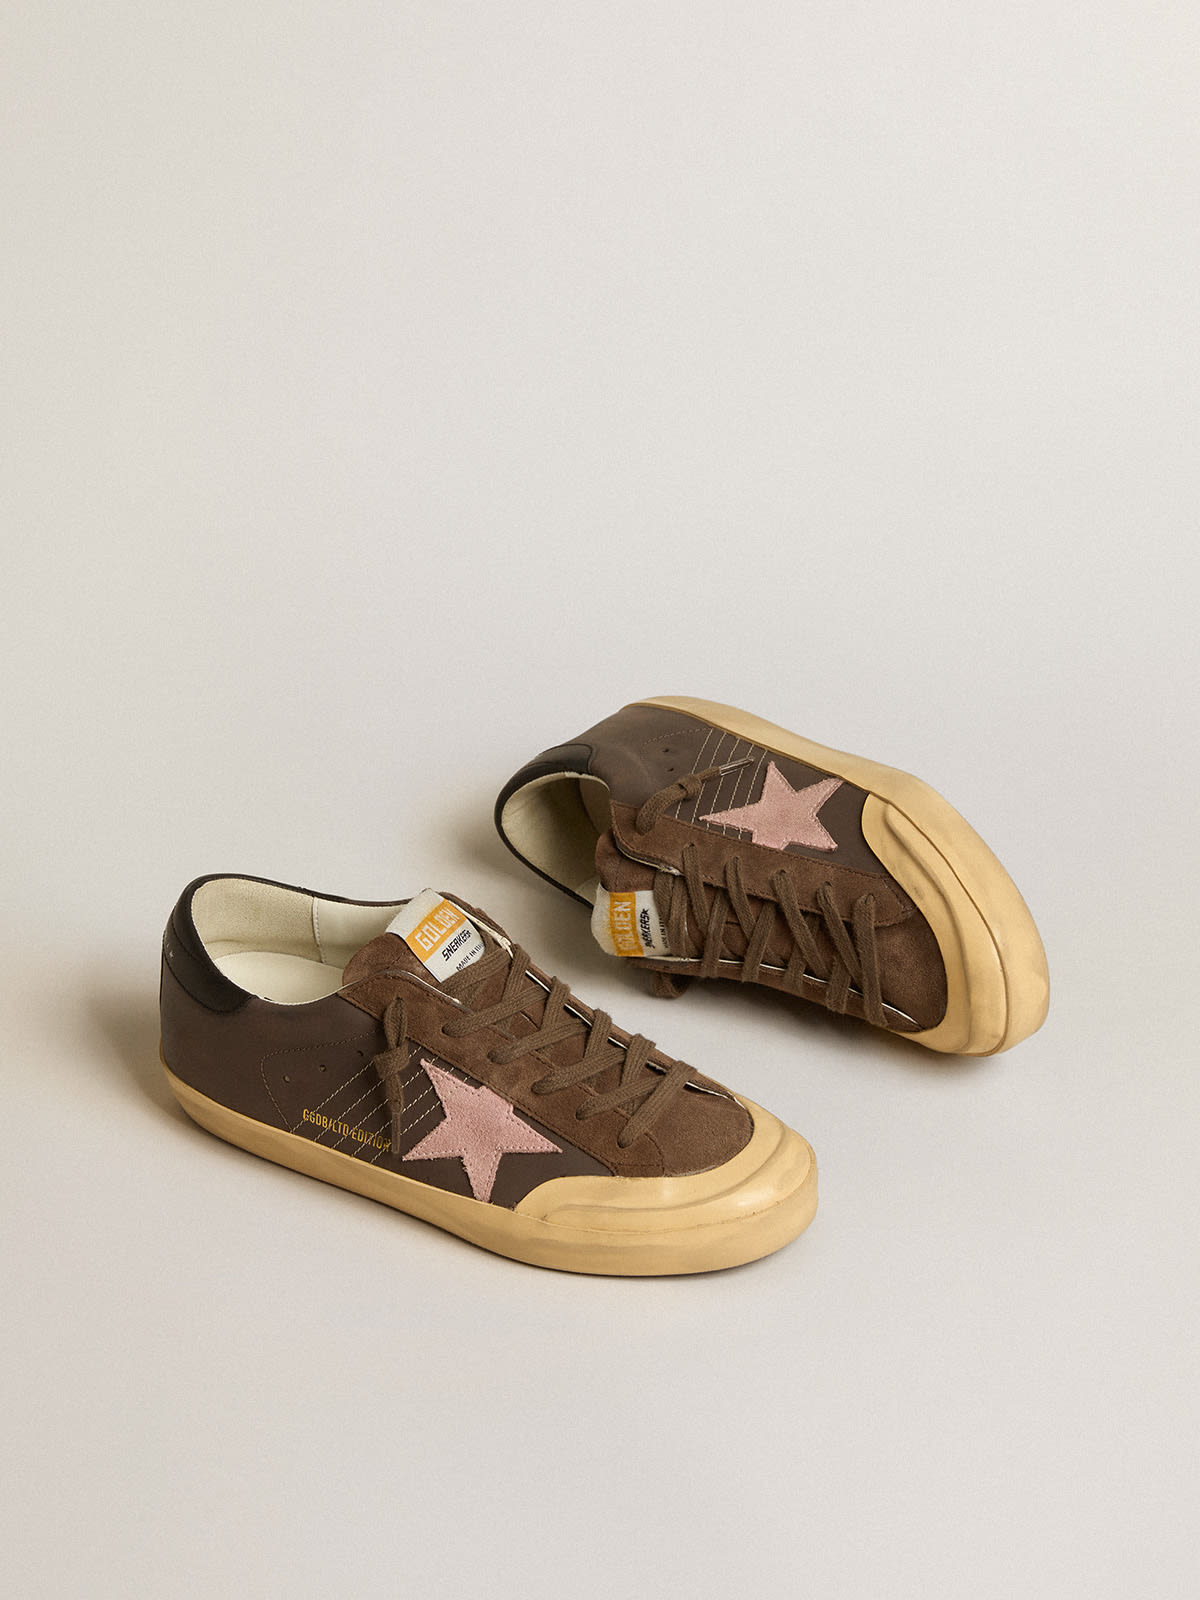 Golden Goose - Super-Star Penstar LTD in brown leather with pink suede star in 